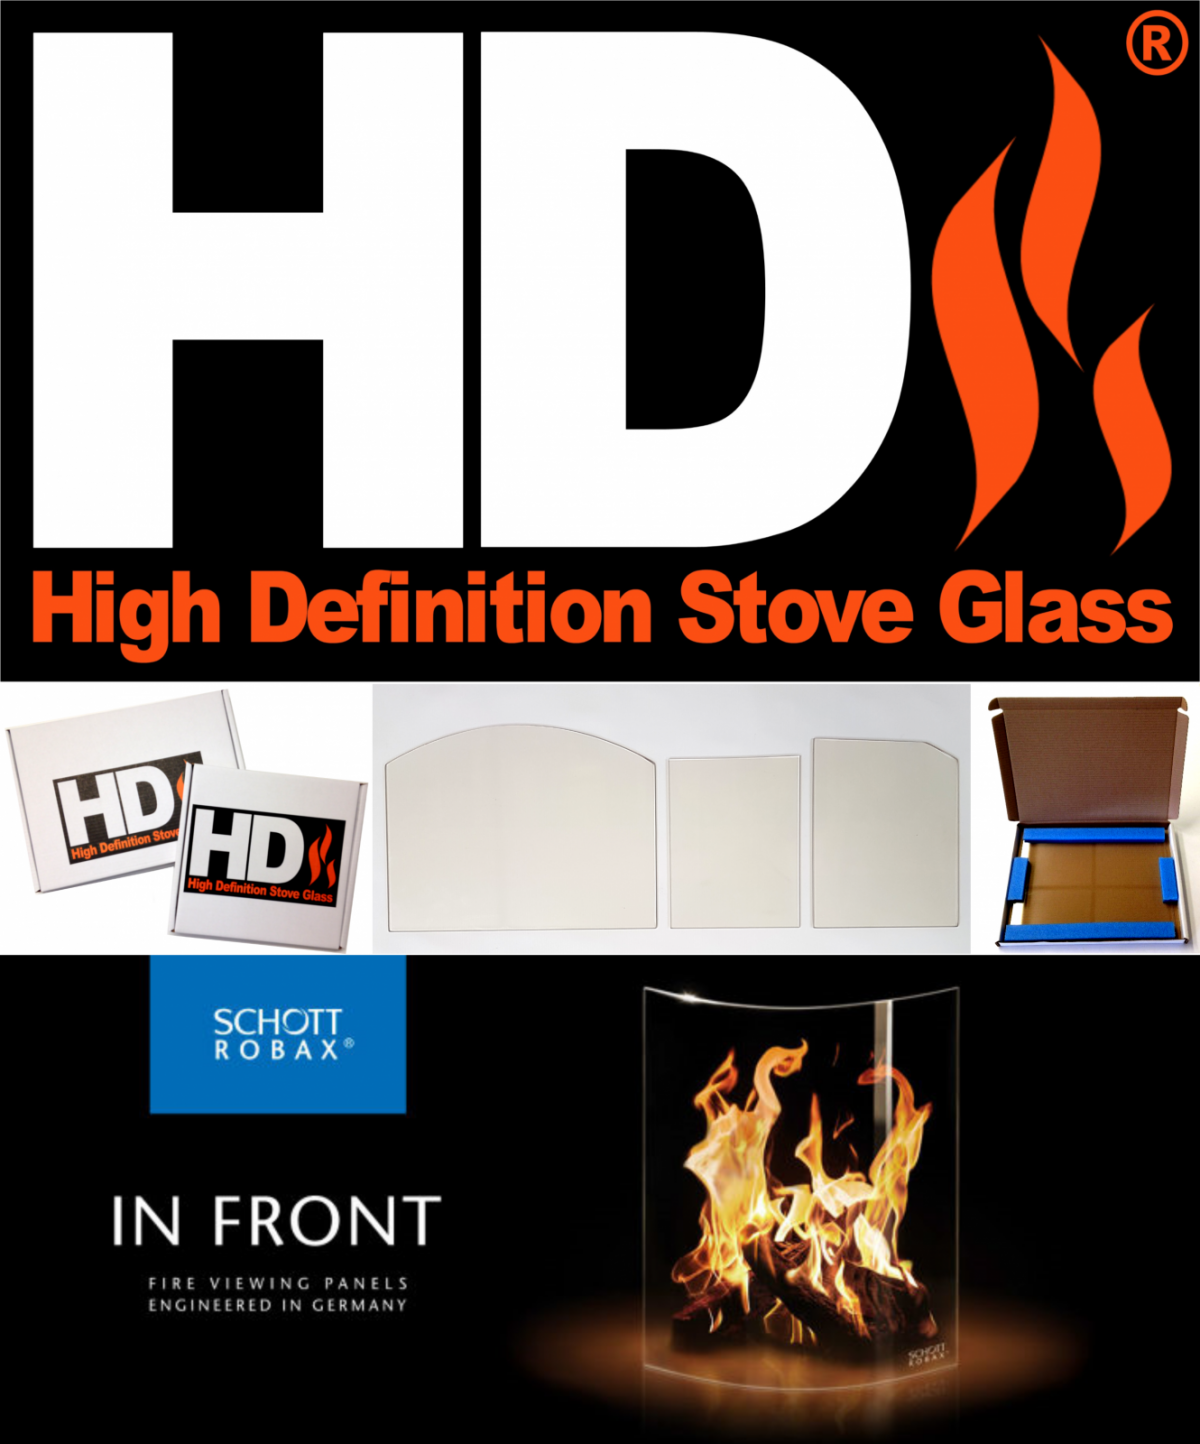 High Definition Stove Glass for the Hunter Vogue